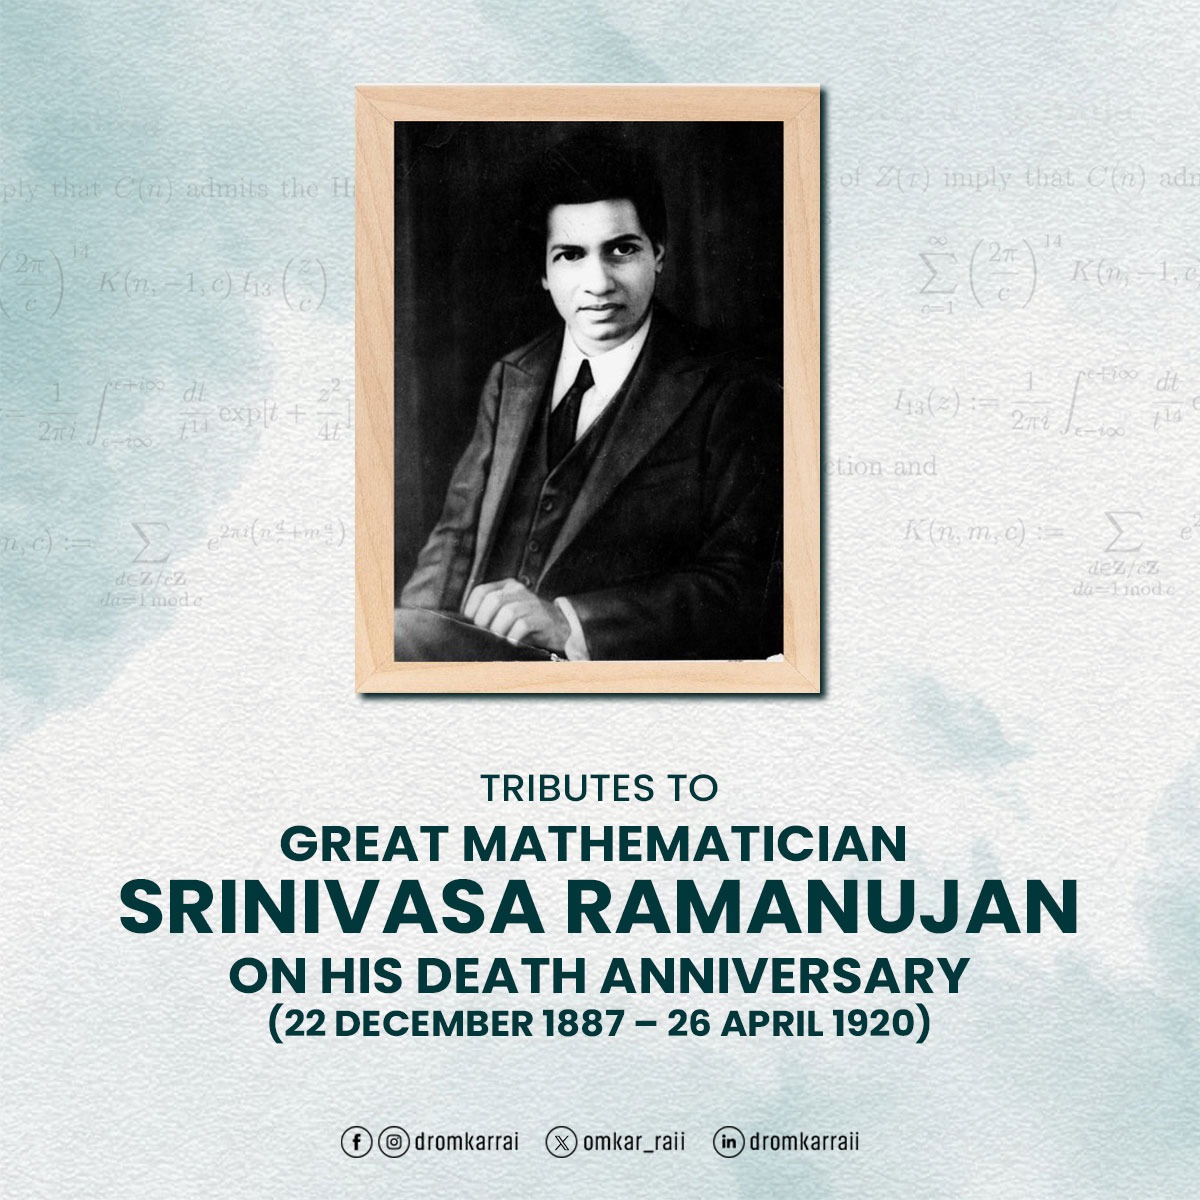 In commemoration of the legendary mathematician #SrinivasaRamanujan on his death anniversary, let's reflect on his extraordinary brilliance. By the age of 13, he had not only mastered S. L. Loney's advanced trigonometry but also independently discovered theorems on his own.